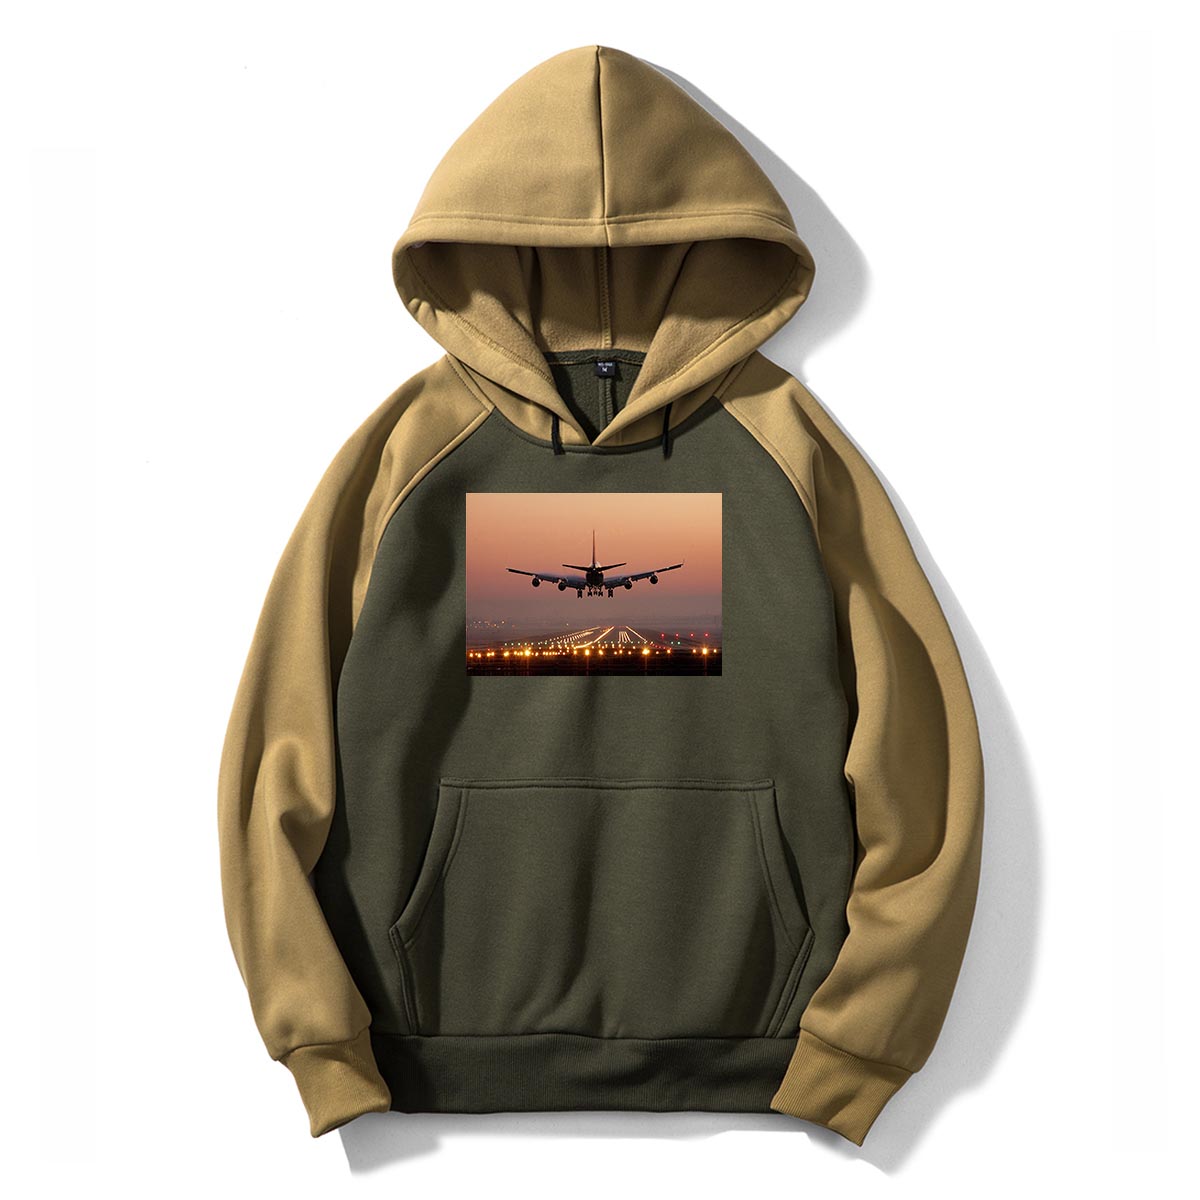 Landing Boeing 747 During Sunset Designed Colourful Hoodies